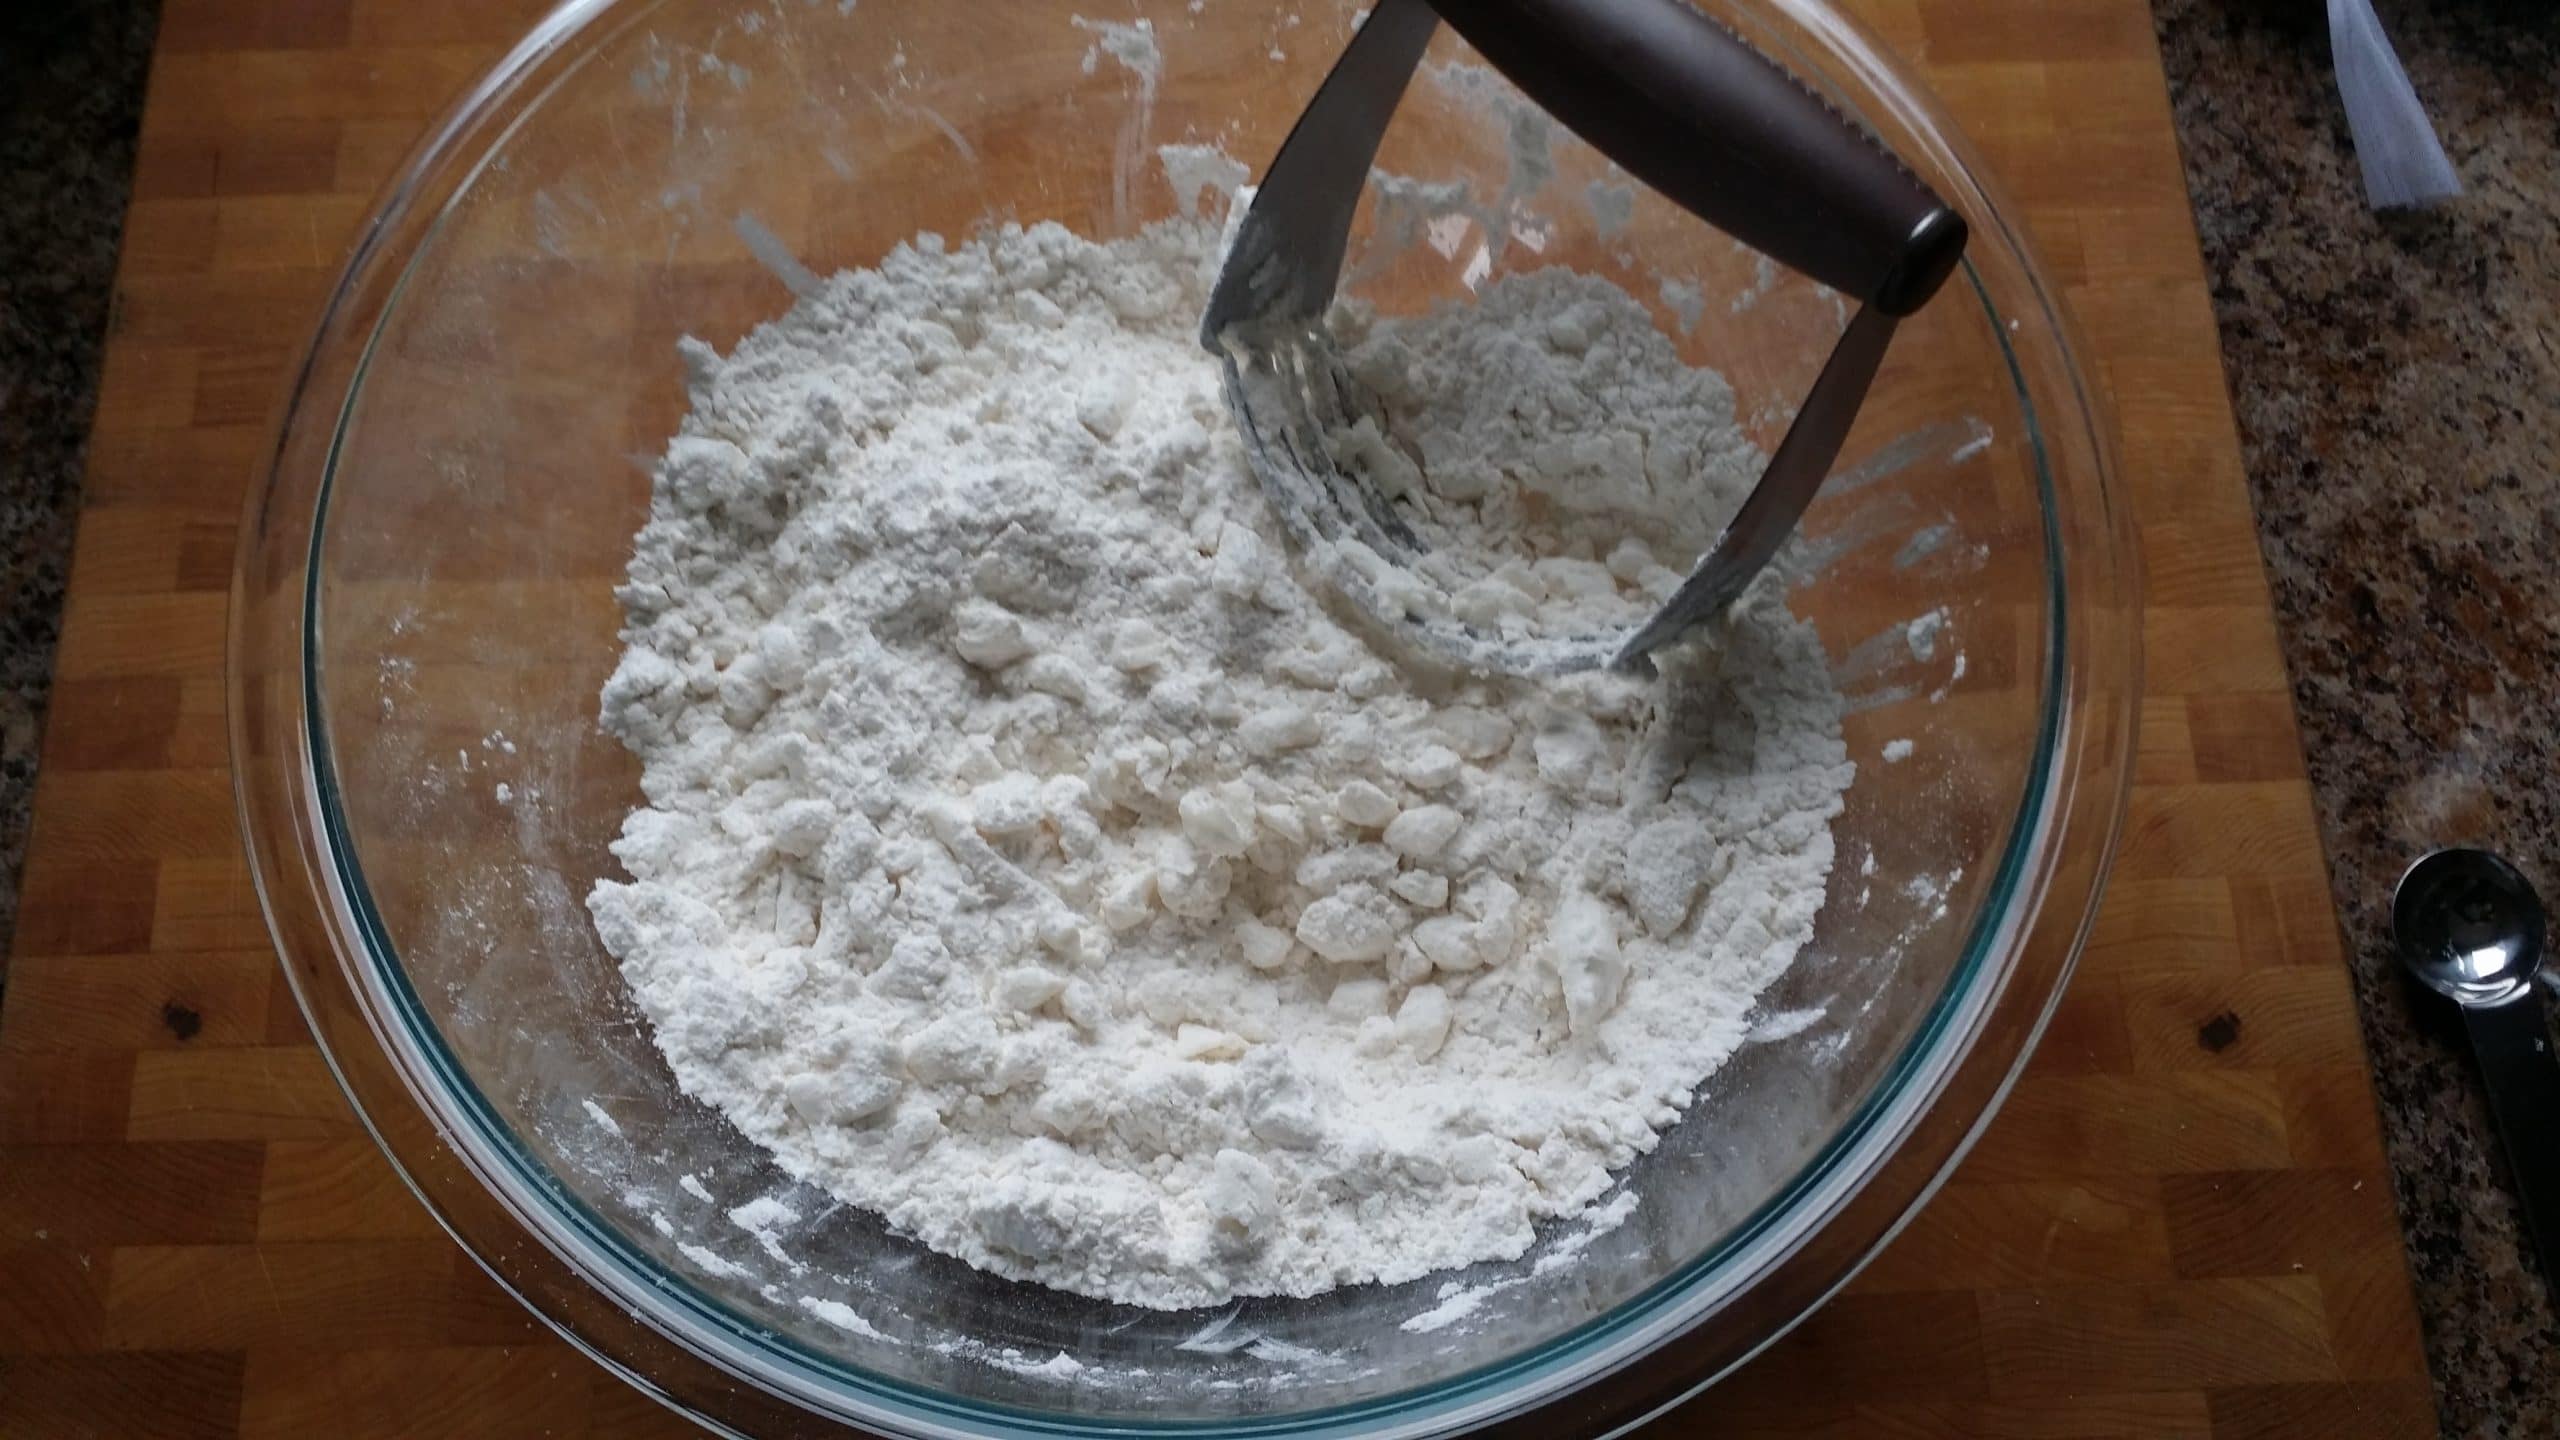 shortening that has been cut into the flour mixture.